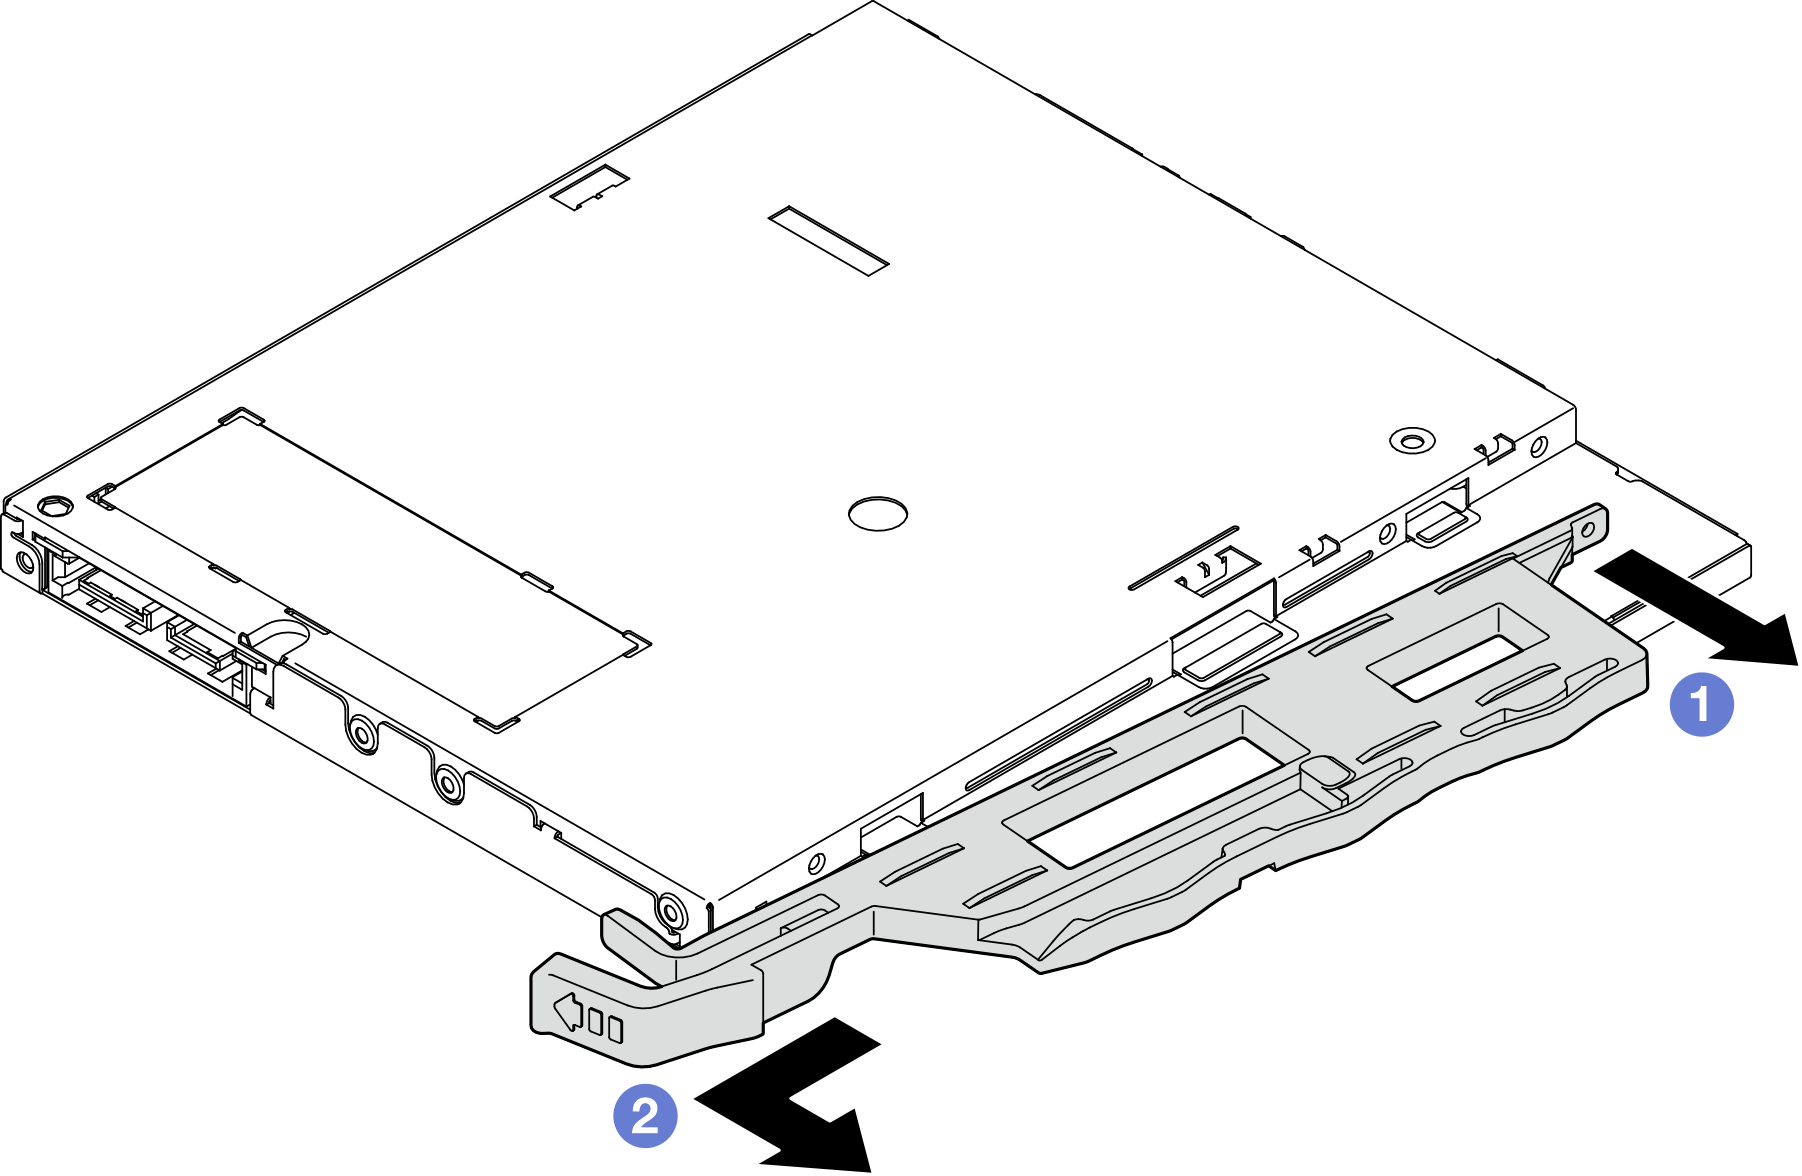 Removing the retainer from optical drive